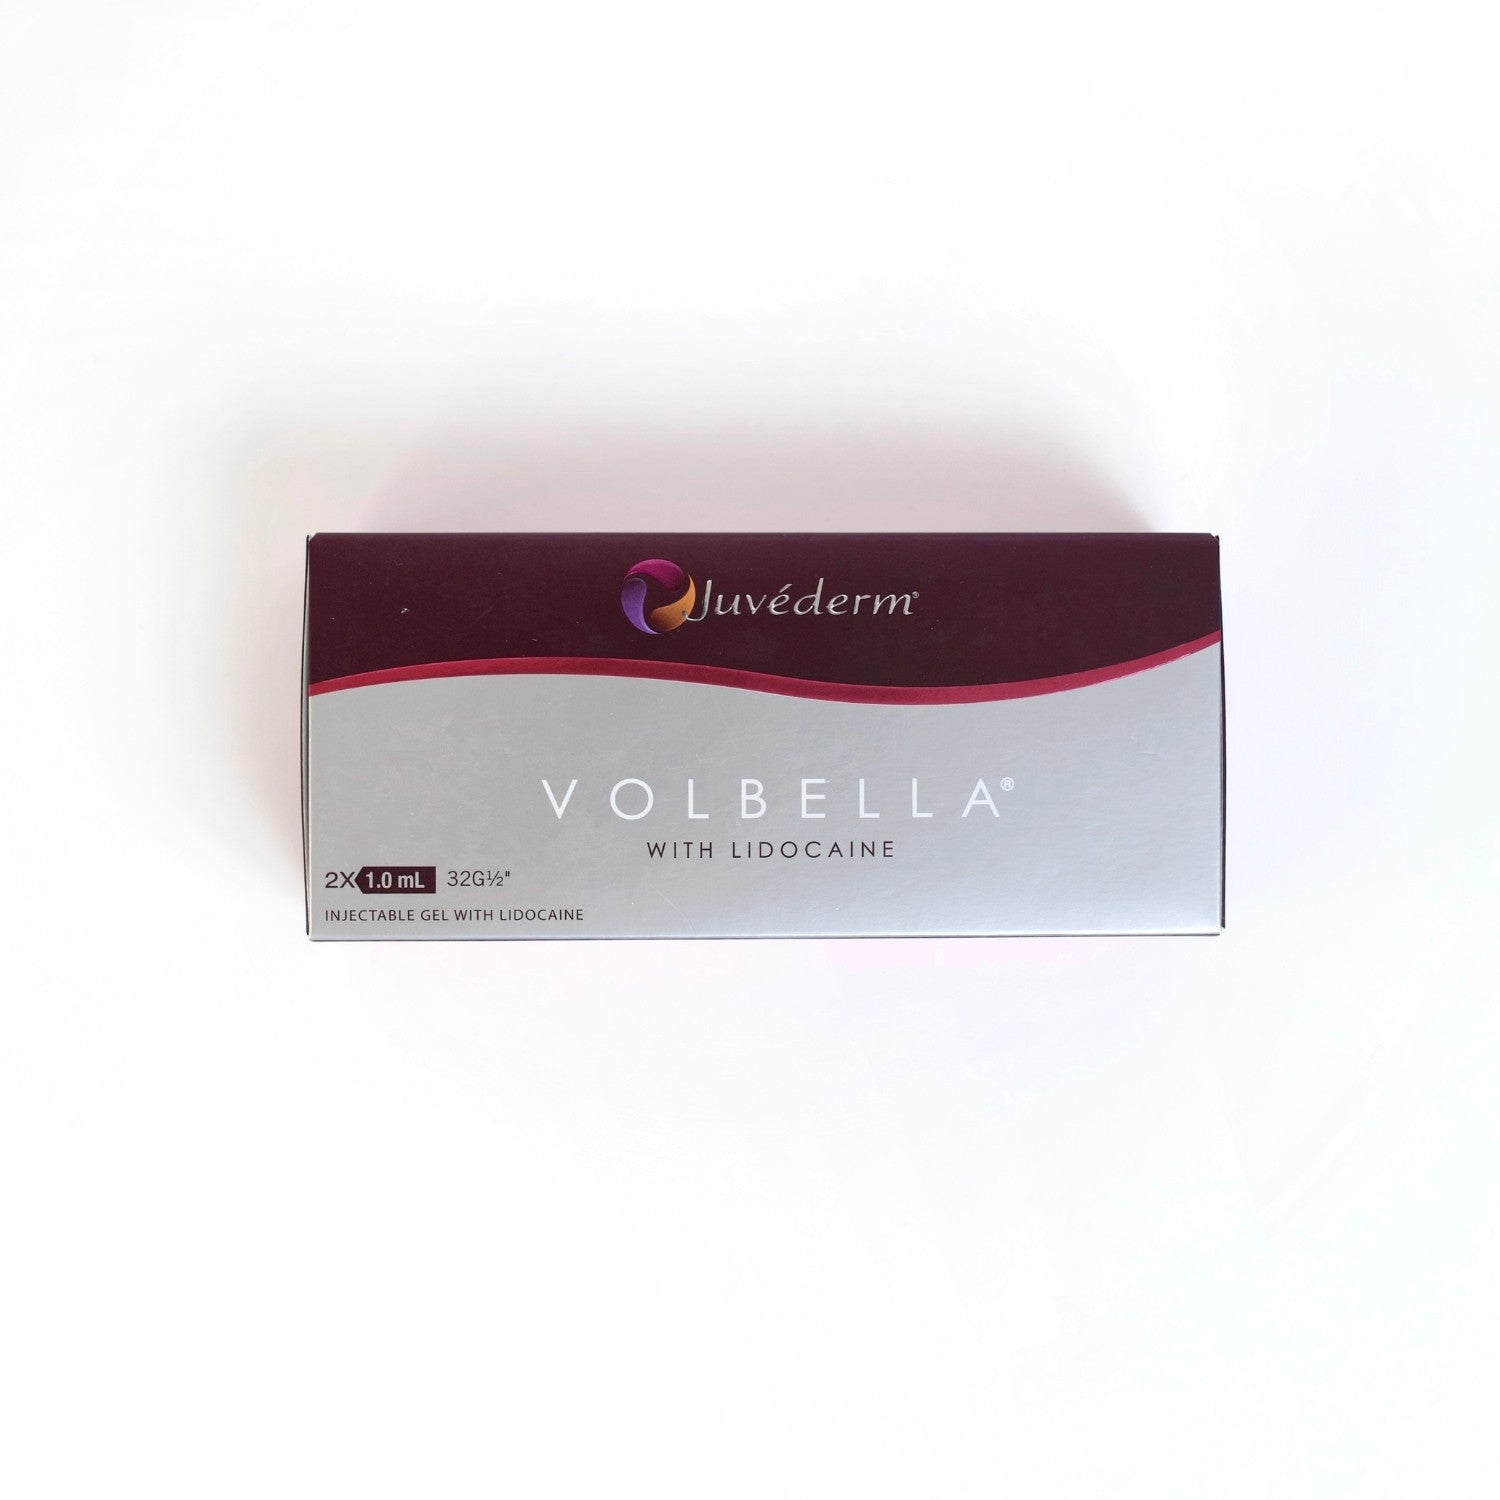 Juvederm Volbella with lidocaine, Juvederm Volbella 2x1ml, Dermal Filler, Juvederm Dermal Filler, Juvederm, front close up view by Skincare Supply Store